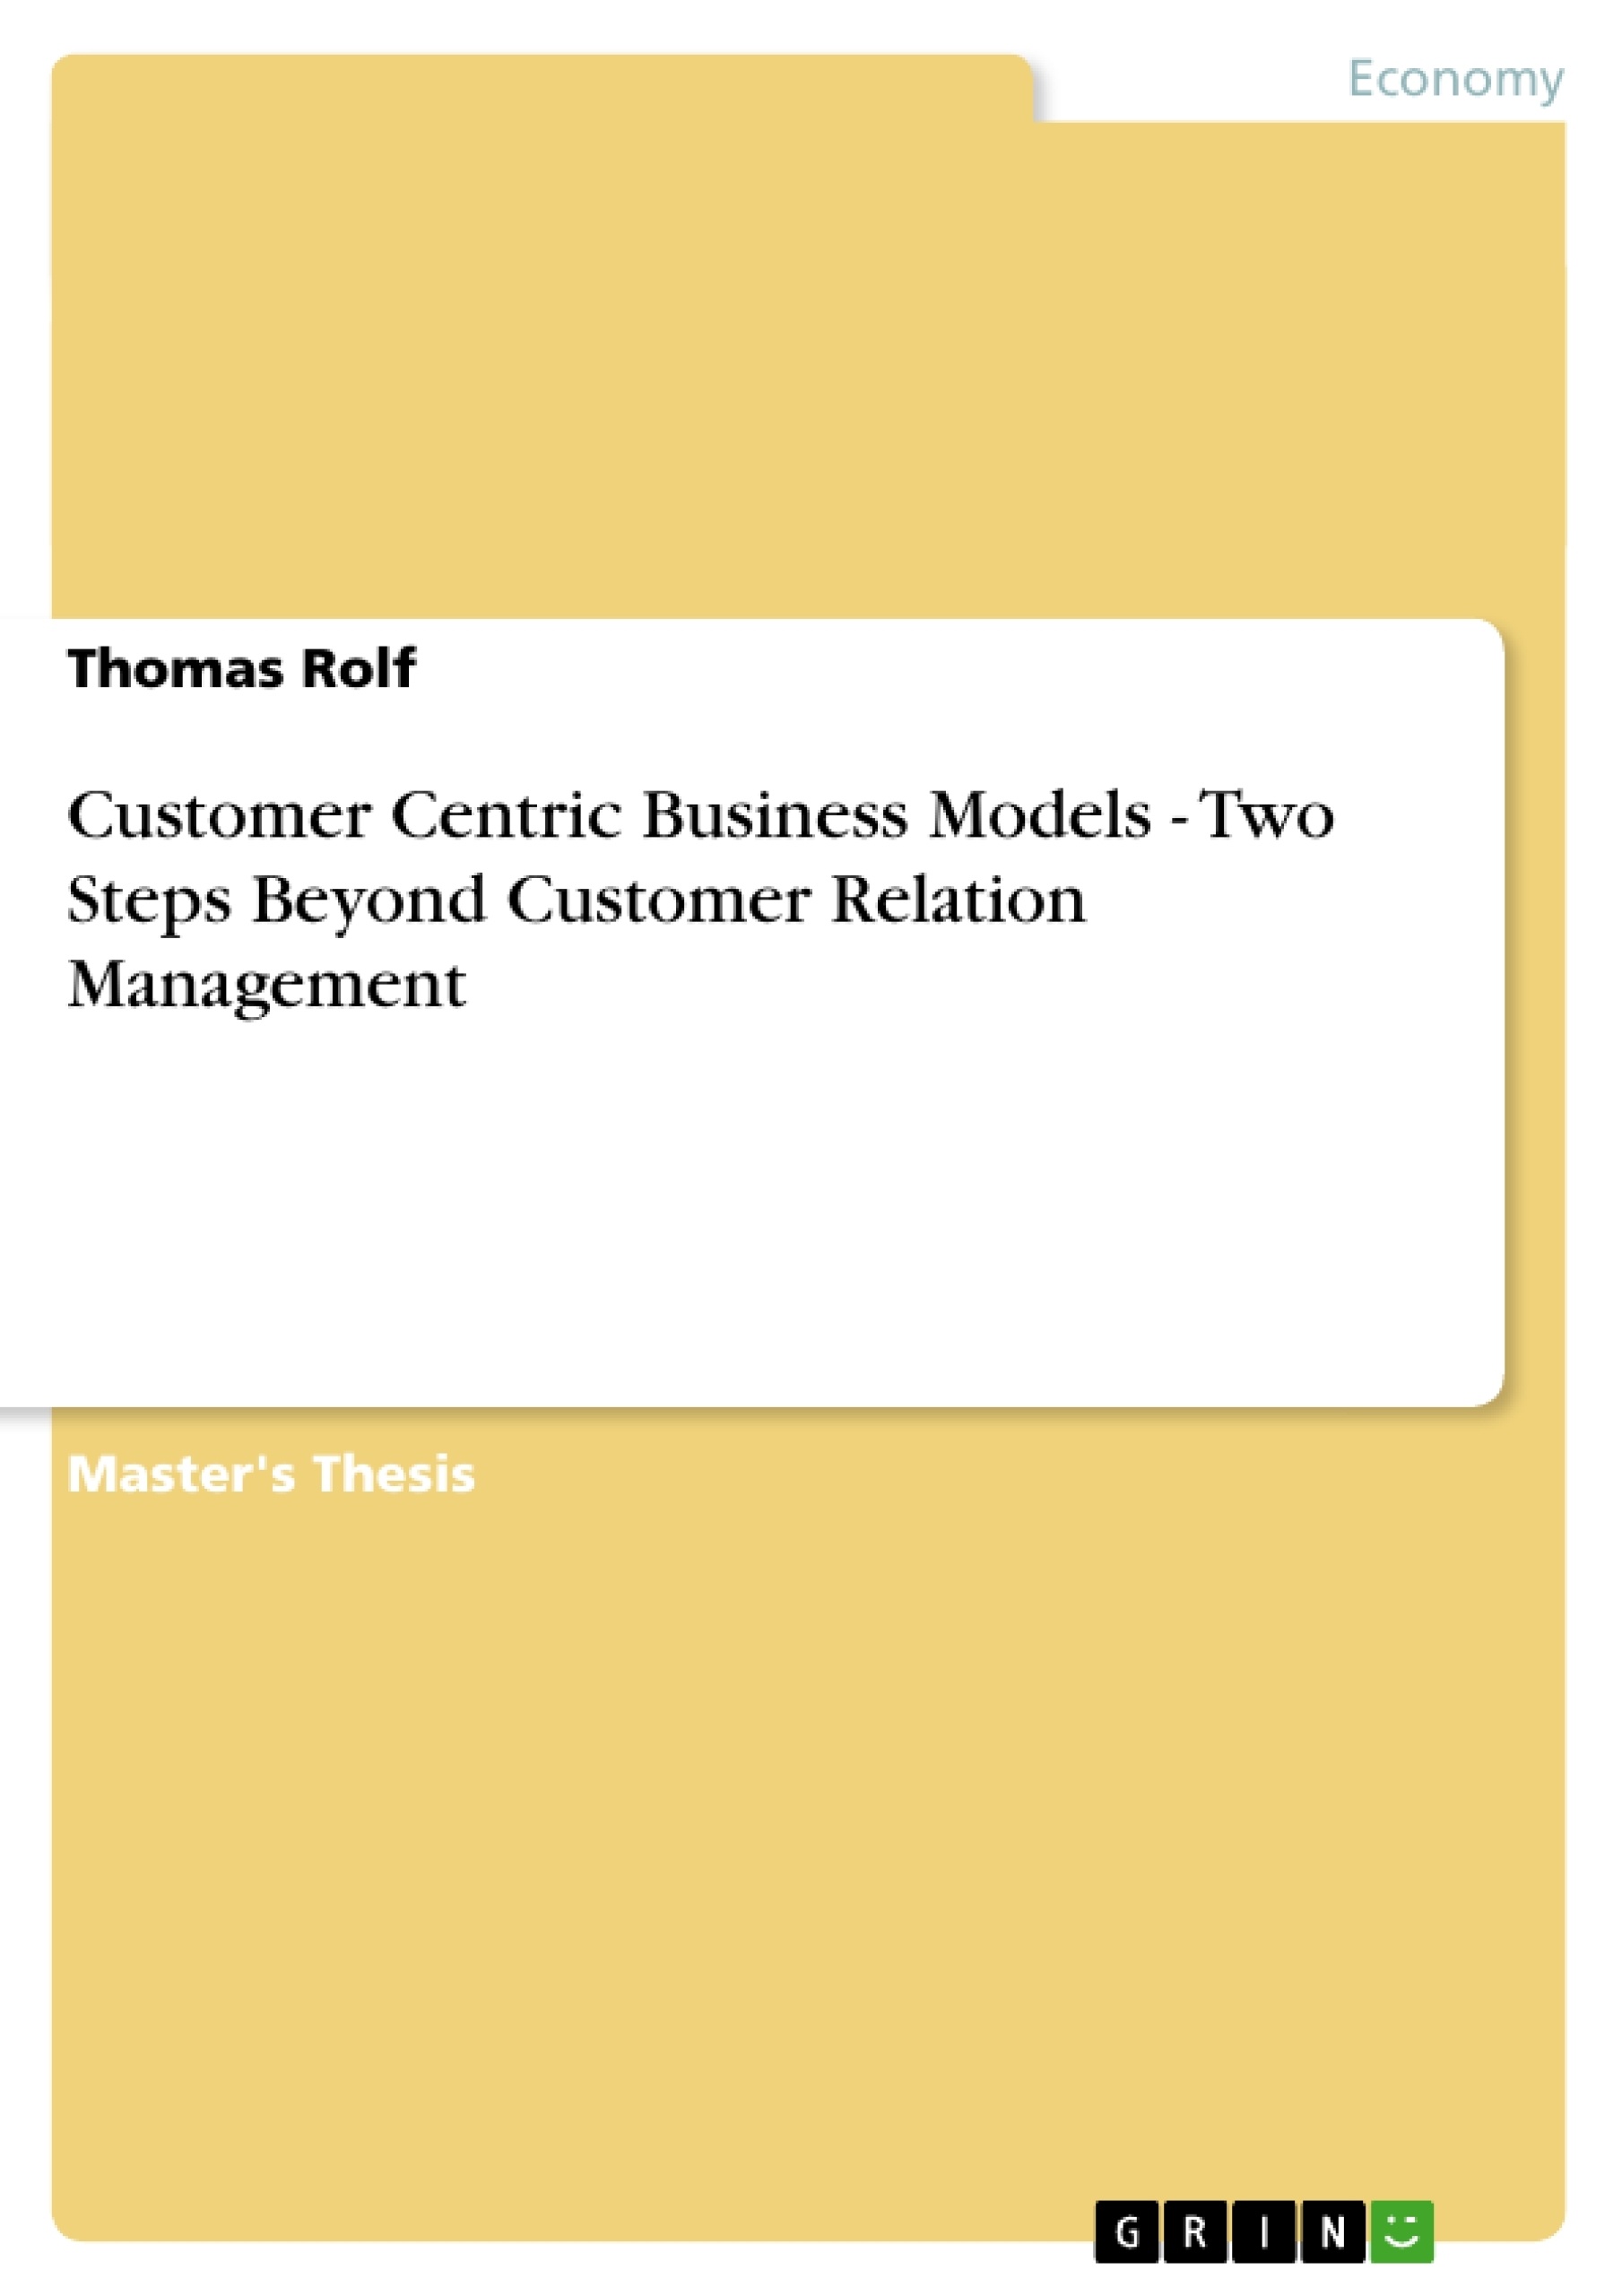 Title: Customer Centric Business Models - Two Steps Beyond Customer Relation Management